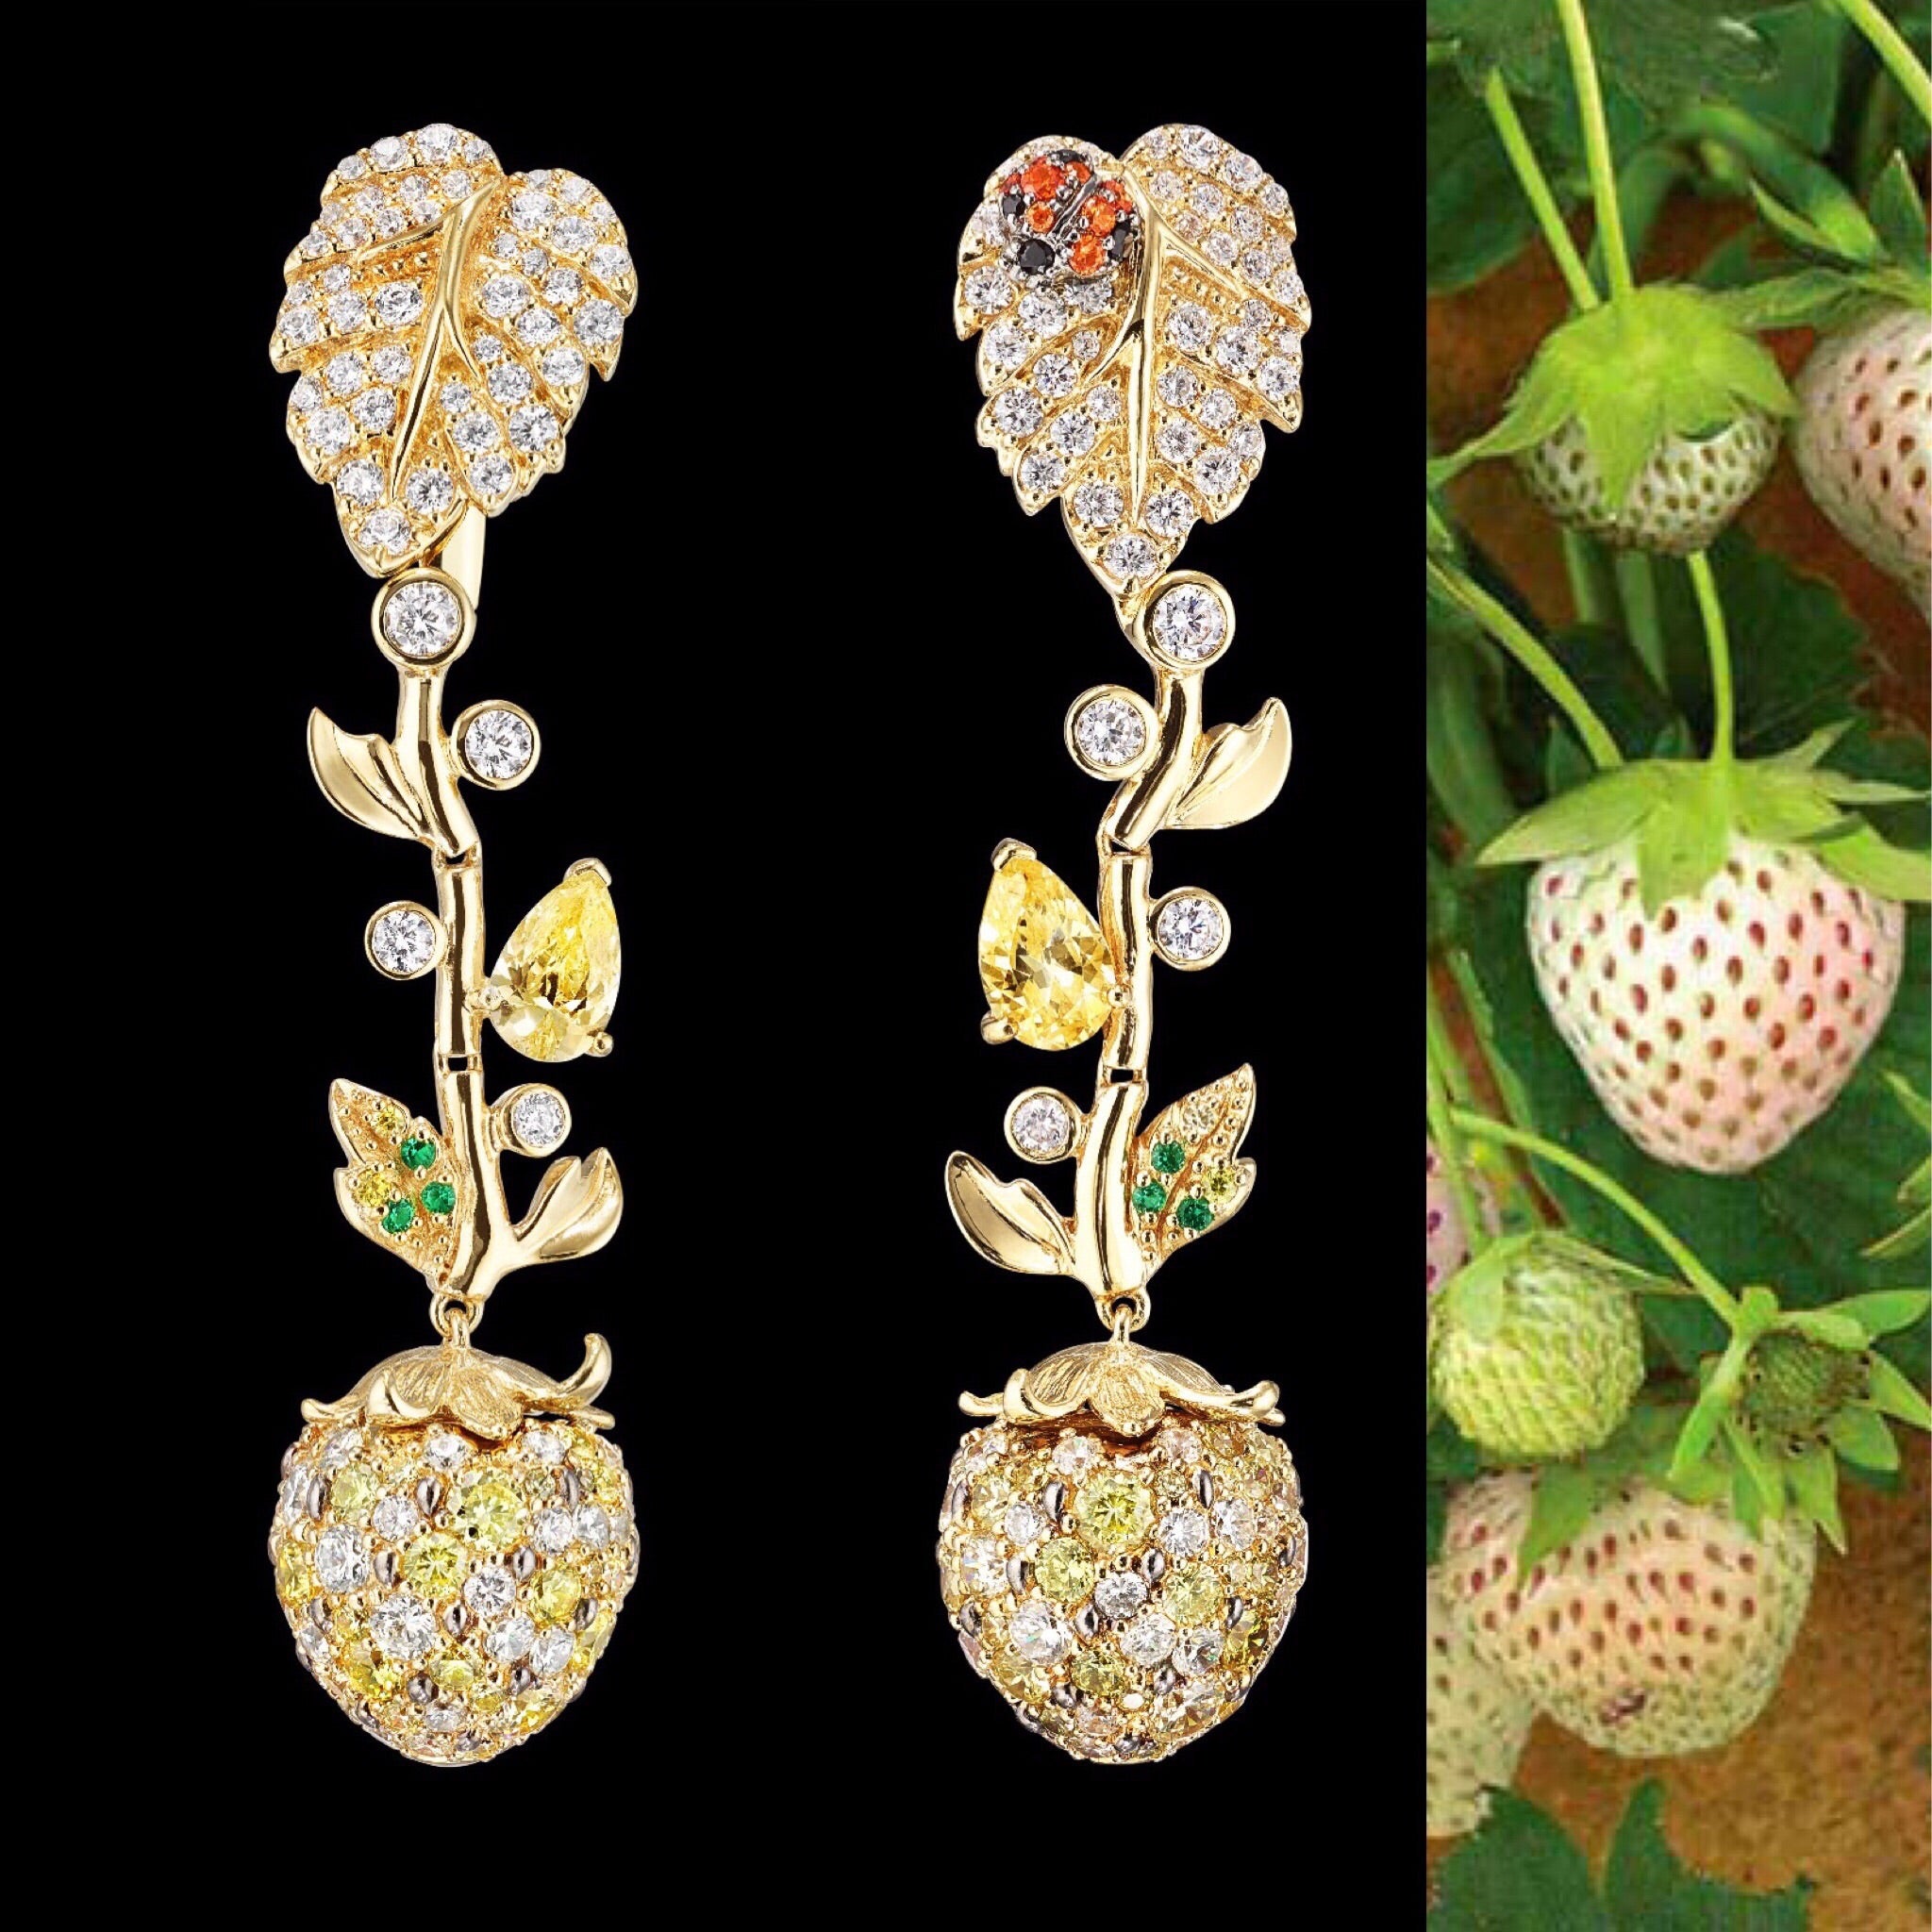 White Strawberry Vine Earrings, Earring, Anabela Chan Joaillerie - Fine jewelry with laboratory grown and created gemstones hand-crafted in the United Kingdom. Anabela Chan Joaillerie is the first fine jewellery brand in the world to champion laboratory-grown and created gemstones with high jewellery design, artisanal craftsmanship and a focus on ethical and sustainable innovations.